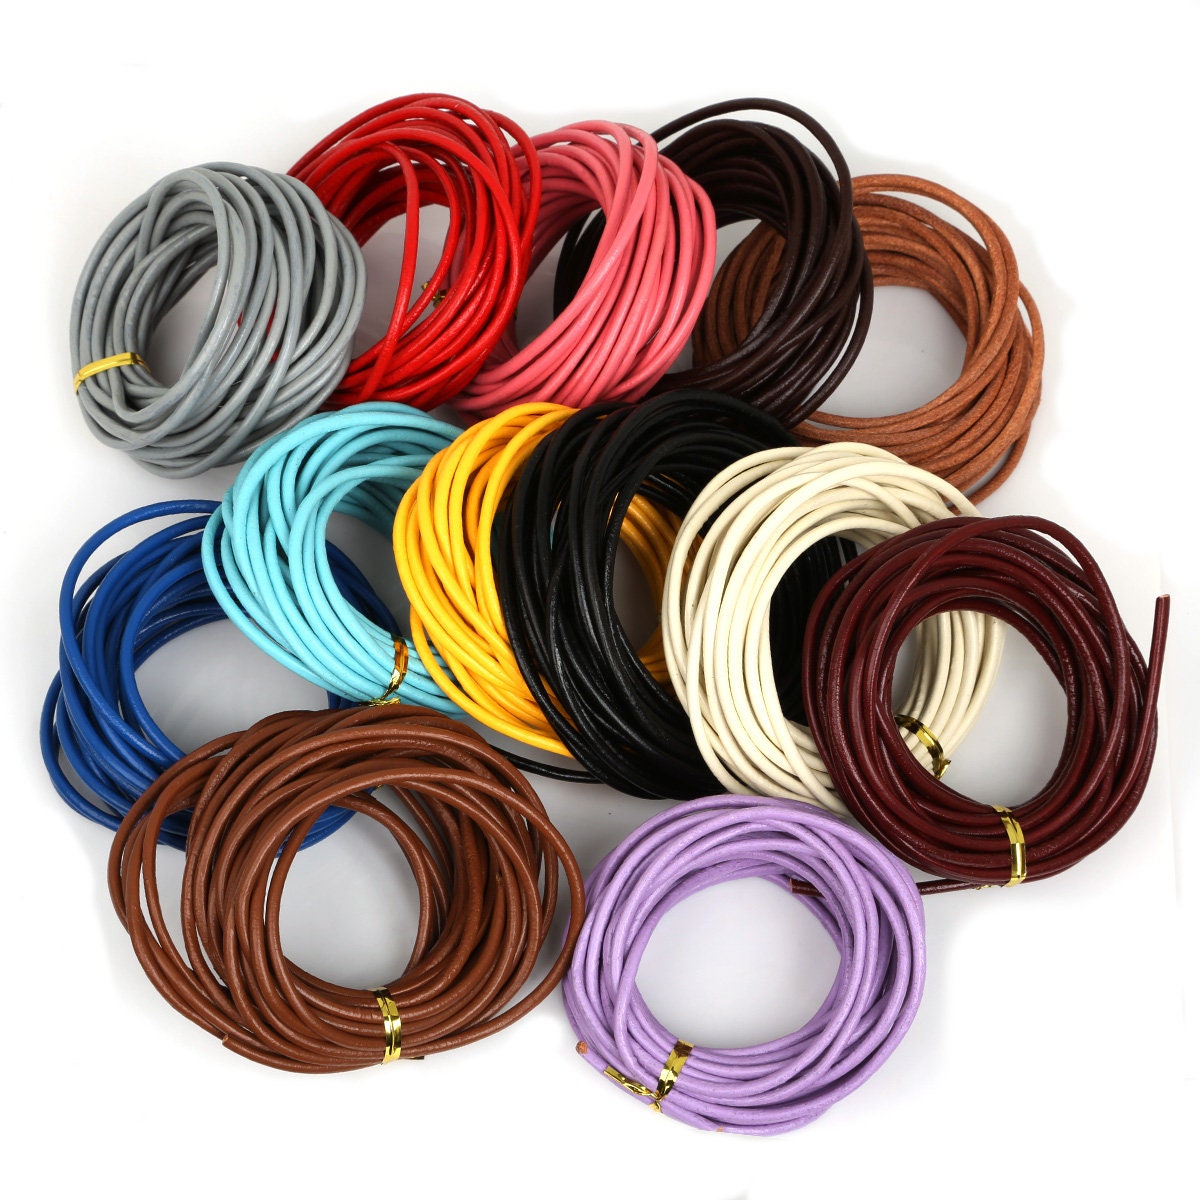 2mm Round Leather Cord, Genuine Leather Cord, Leather String, Natural  Leather Cord, Necklace Cord, Bracelet Cord, 22 Colors, LC2-2 